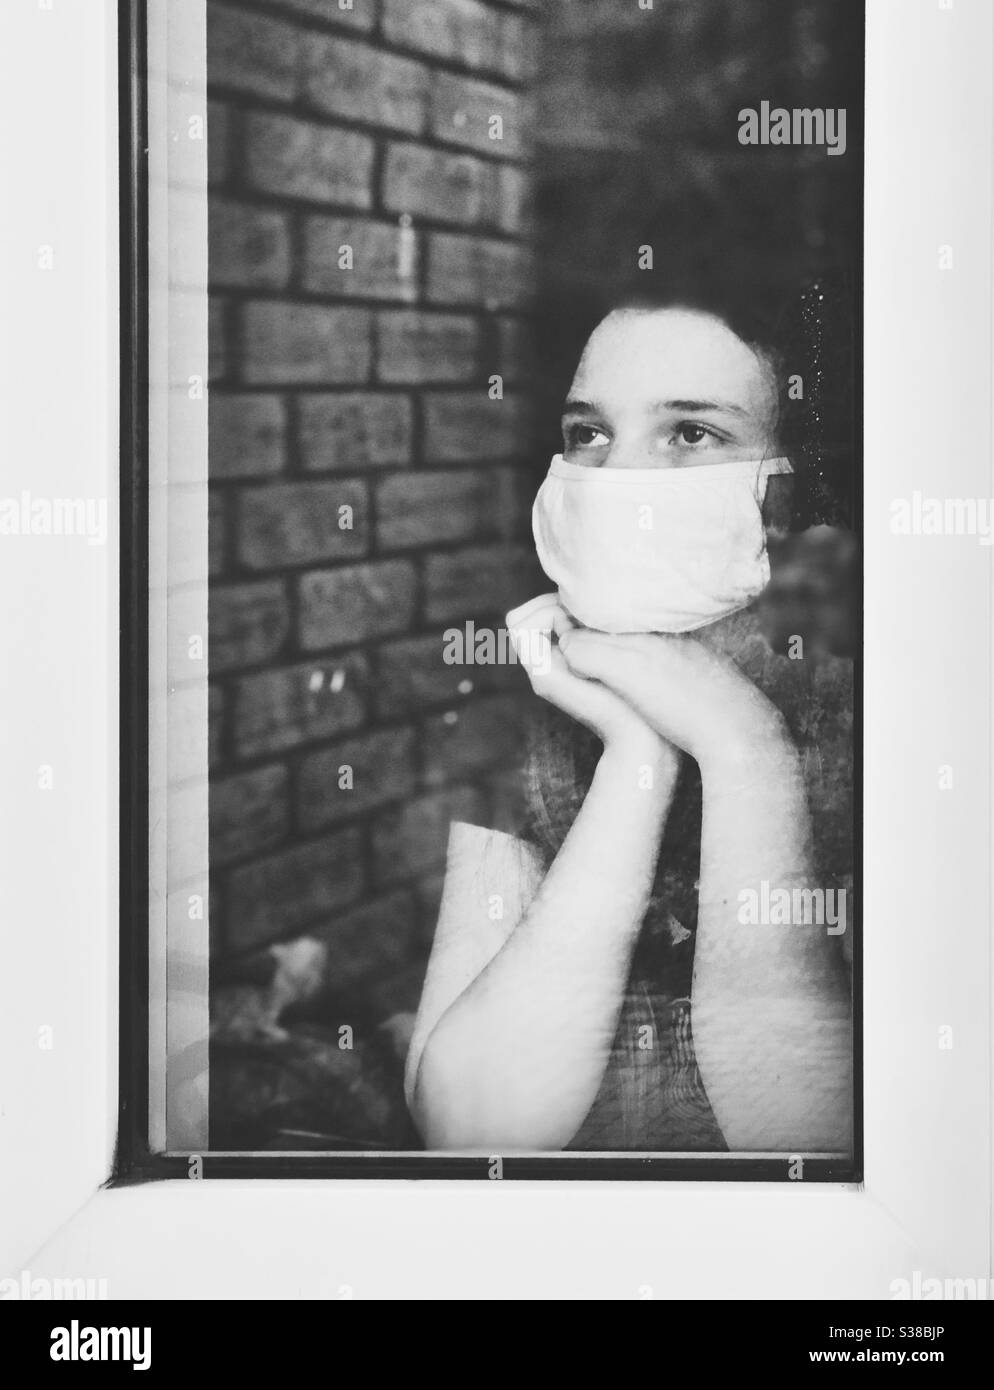 Teen girl wearing white face mask looking out window Stock Photo